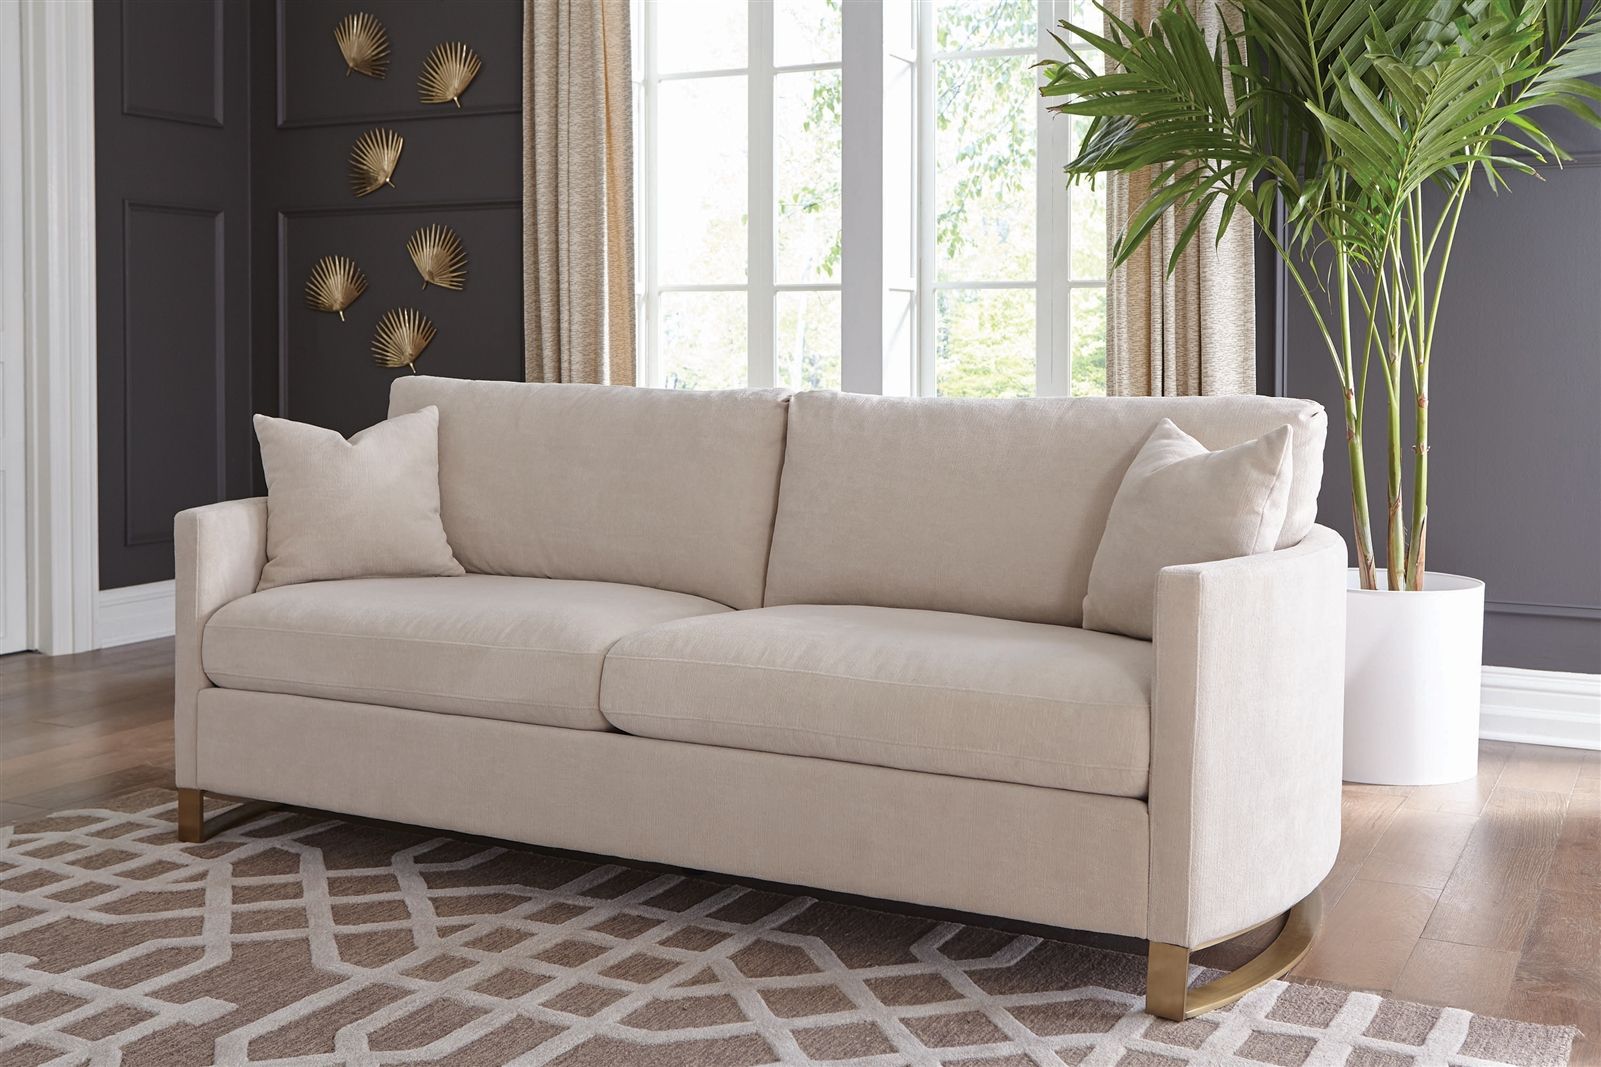 Beige Textured Chenille Upholstered Sofa With Brass Legs Pertaining To Ecru And Otter Console Tables (View 6 of 20)